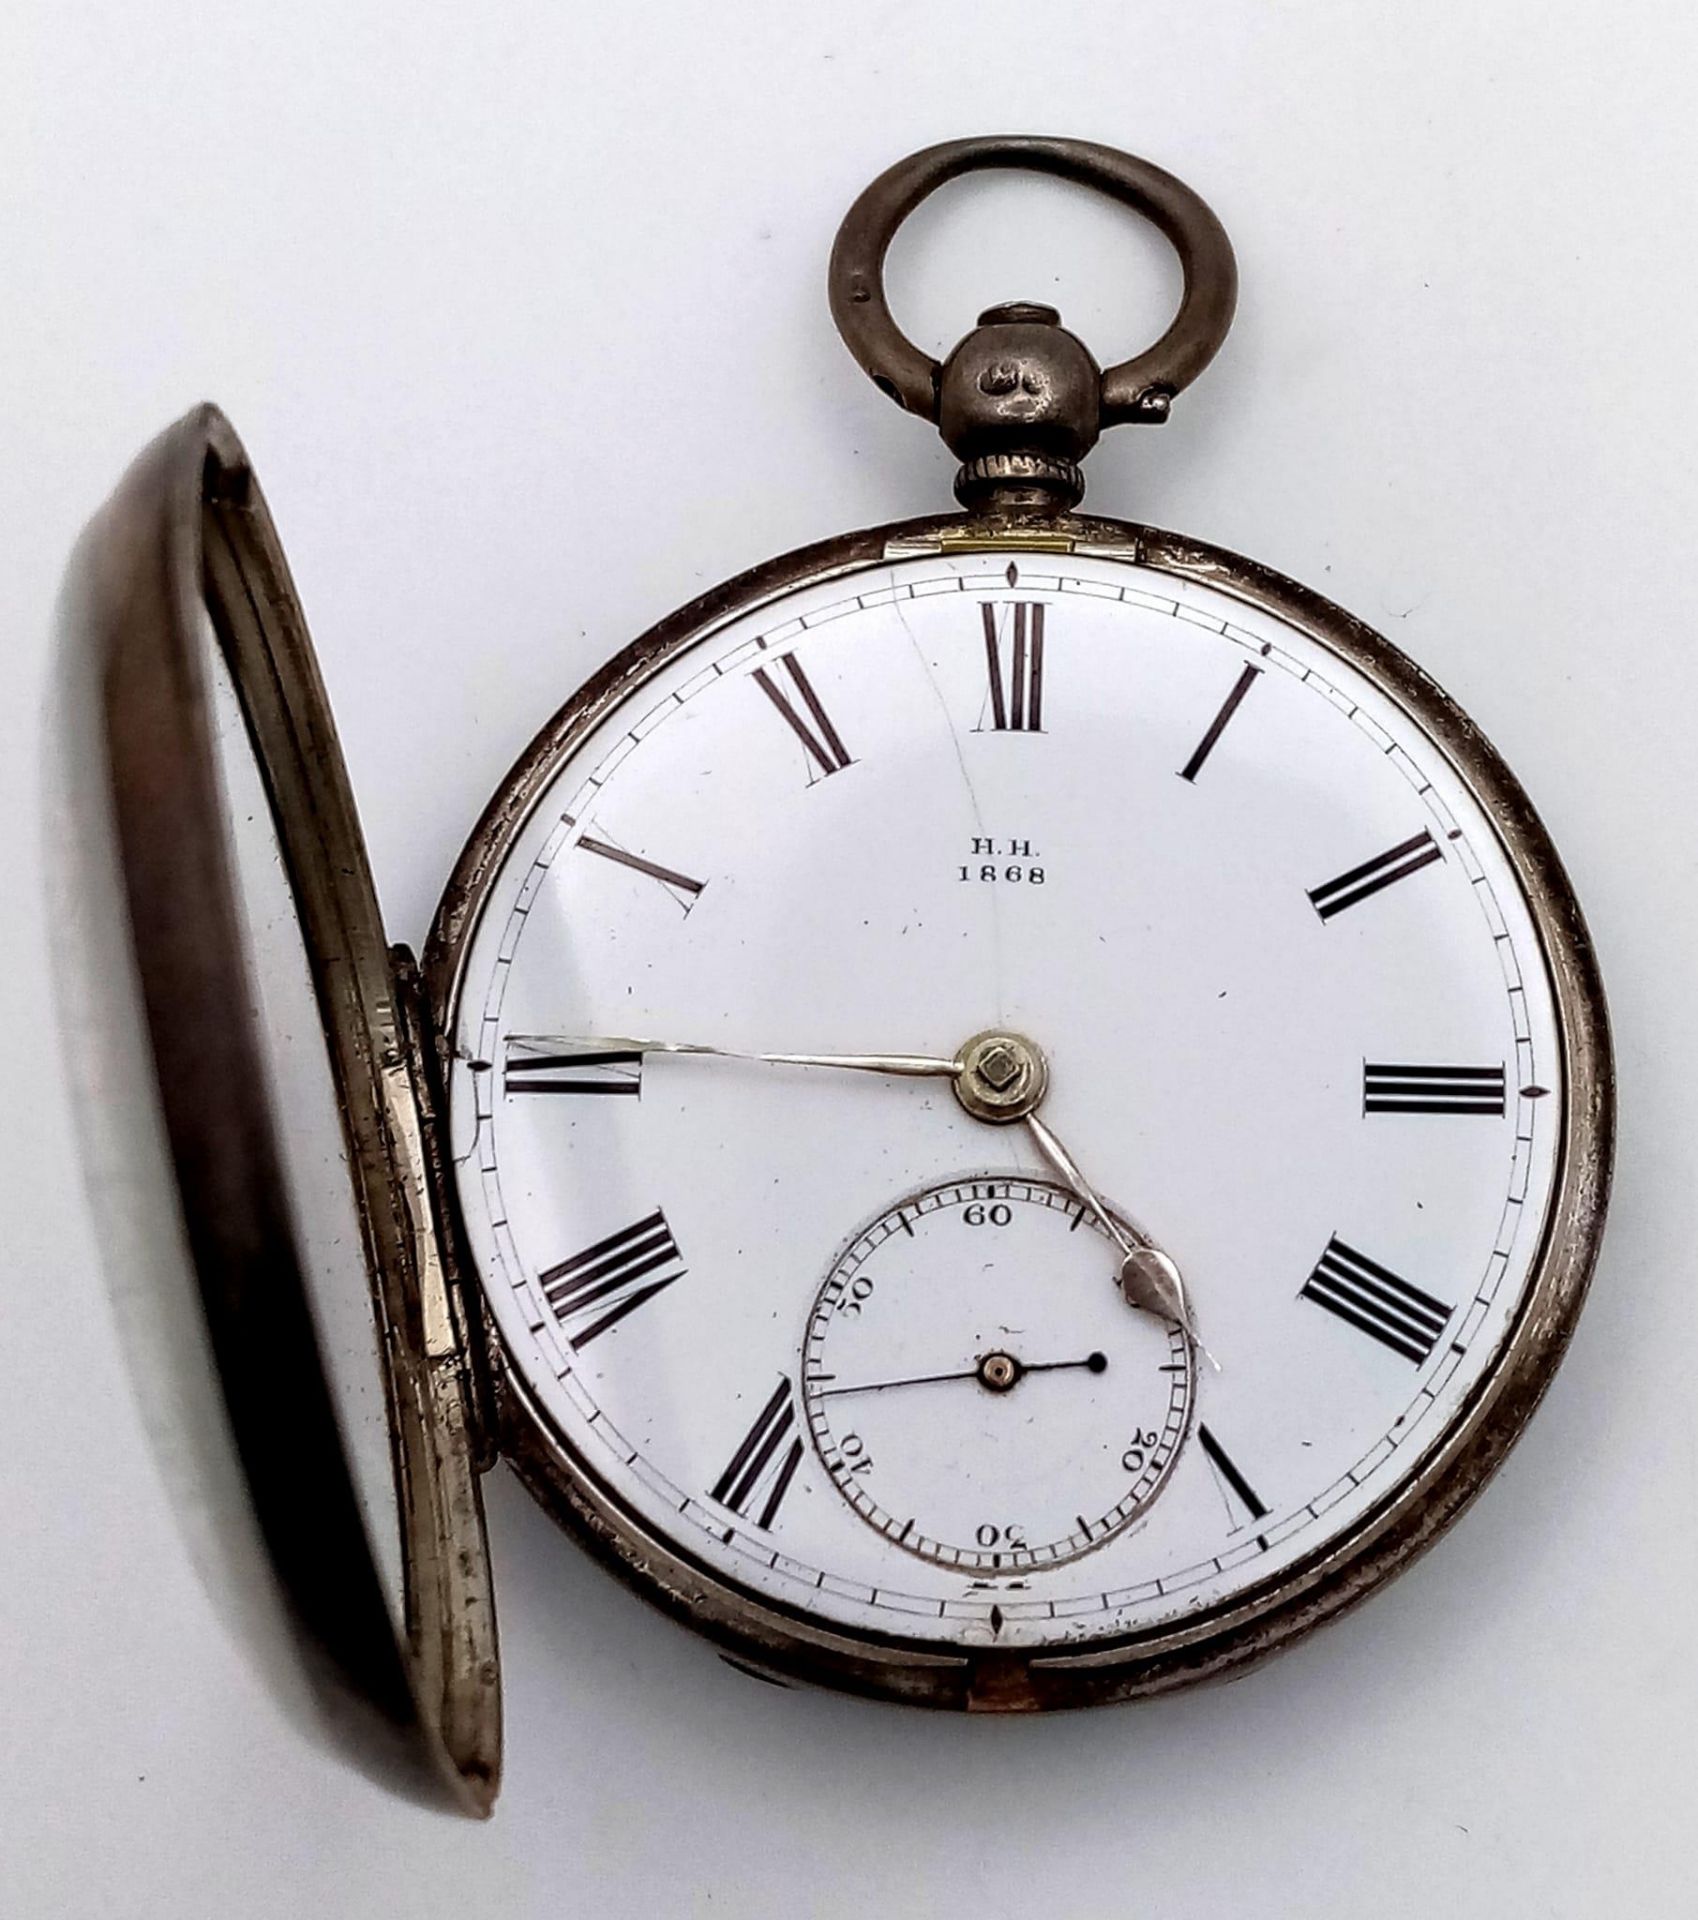 An Antique Sterling Silver Cased H.H. 1868 Pocket Watch. Hallmarks for London 1862. White dial